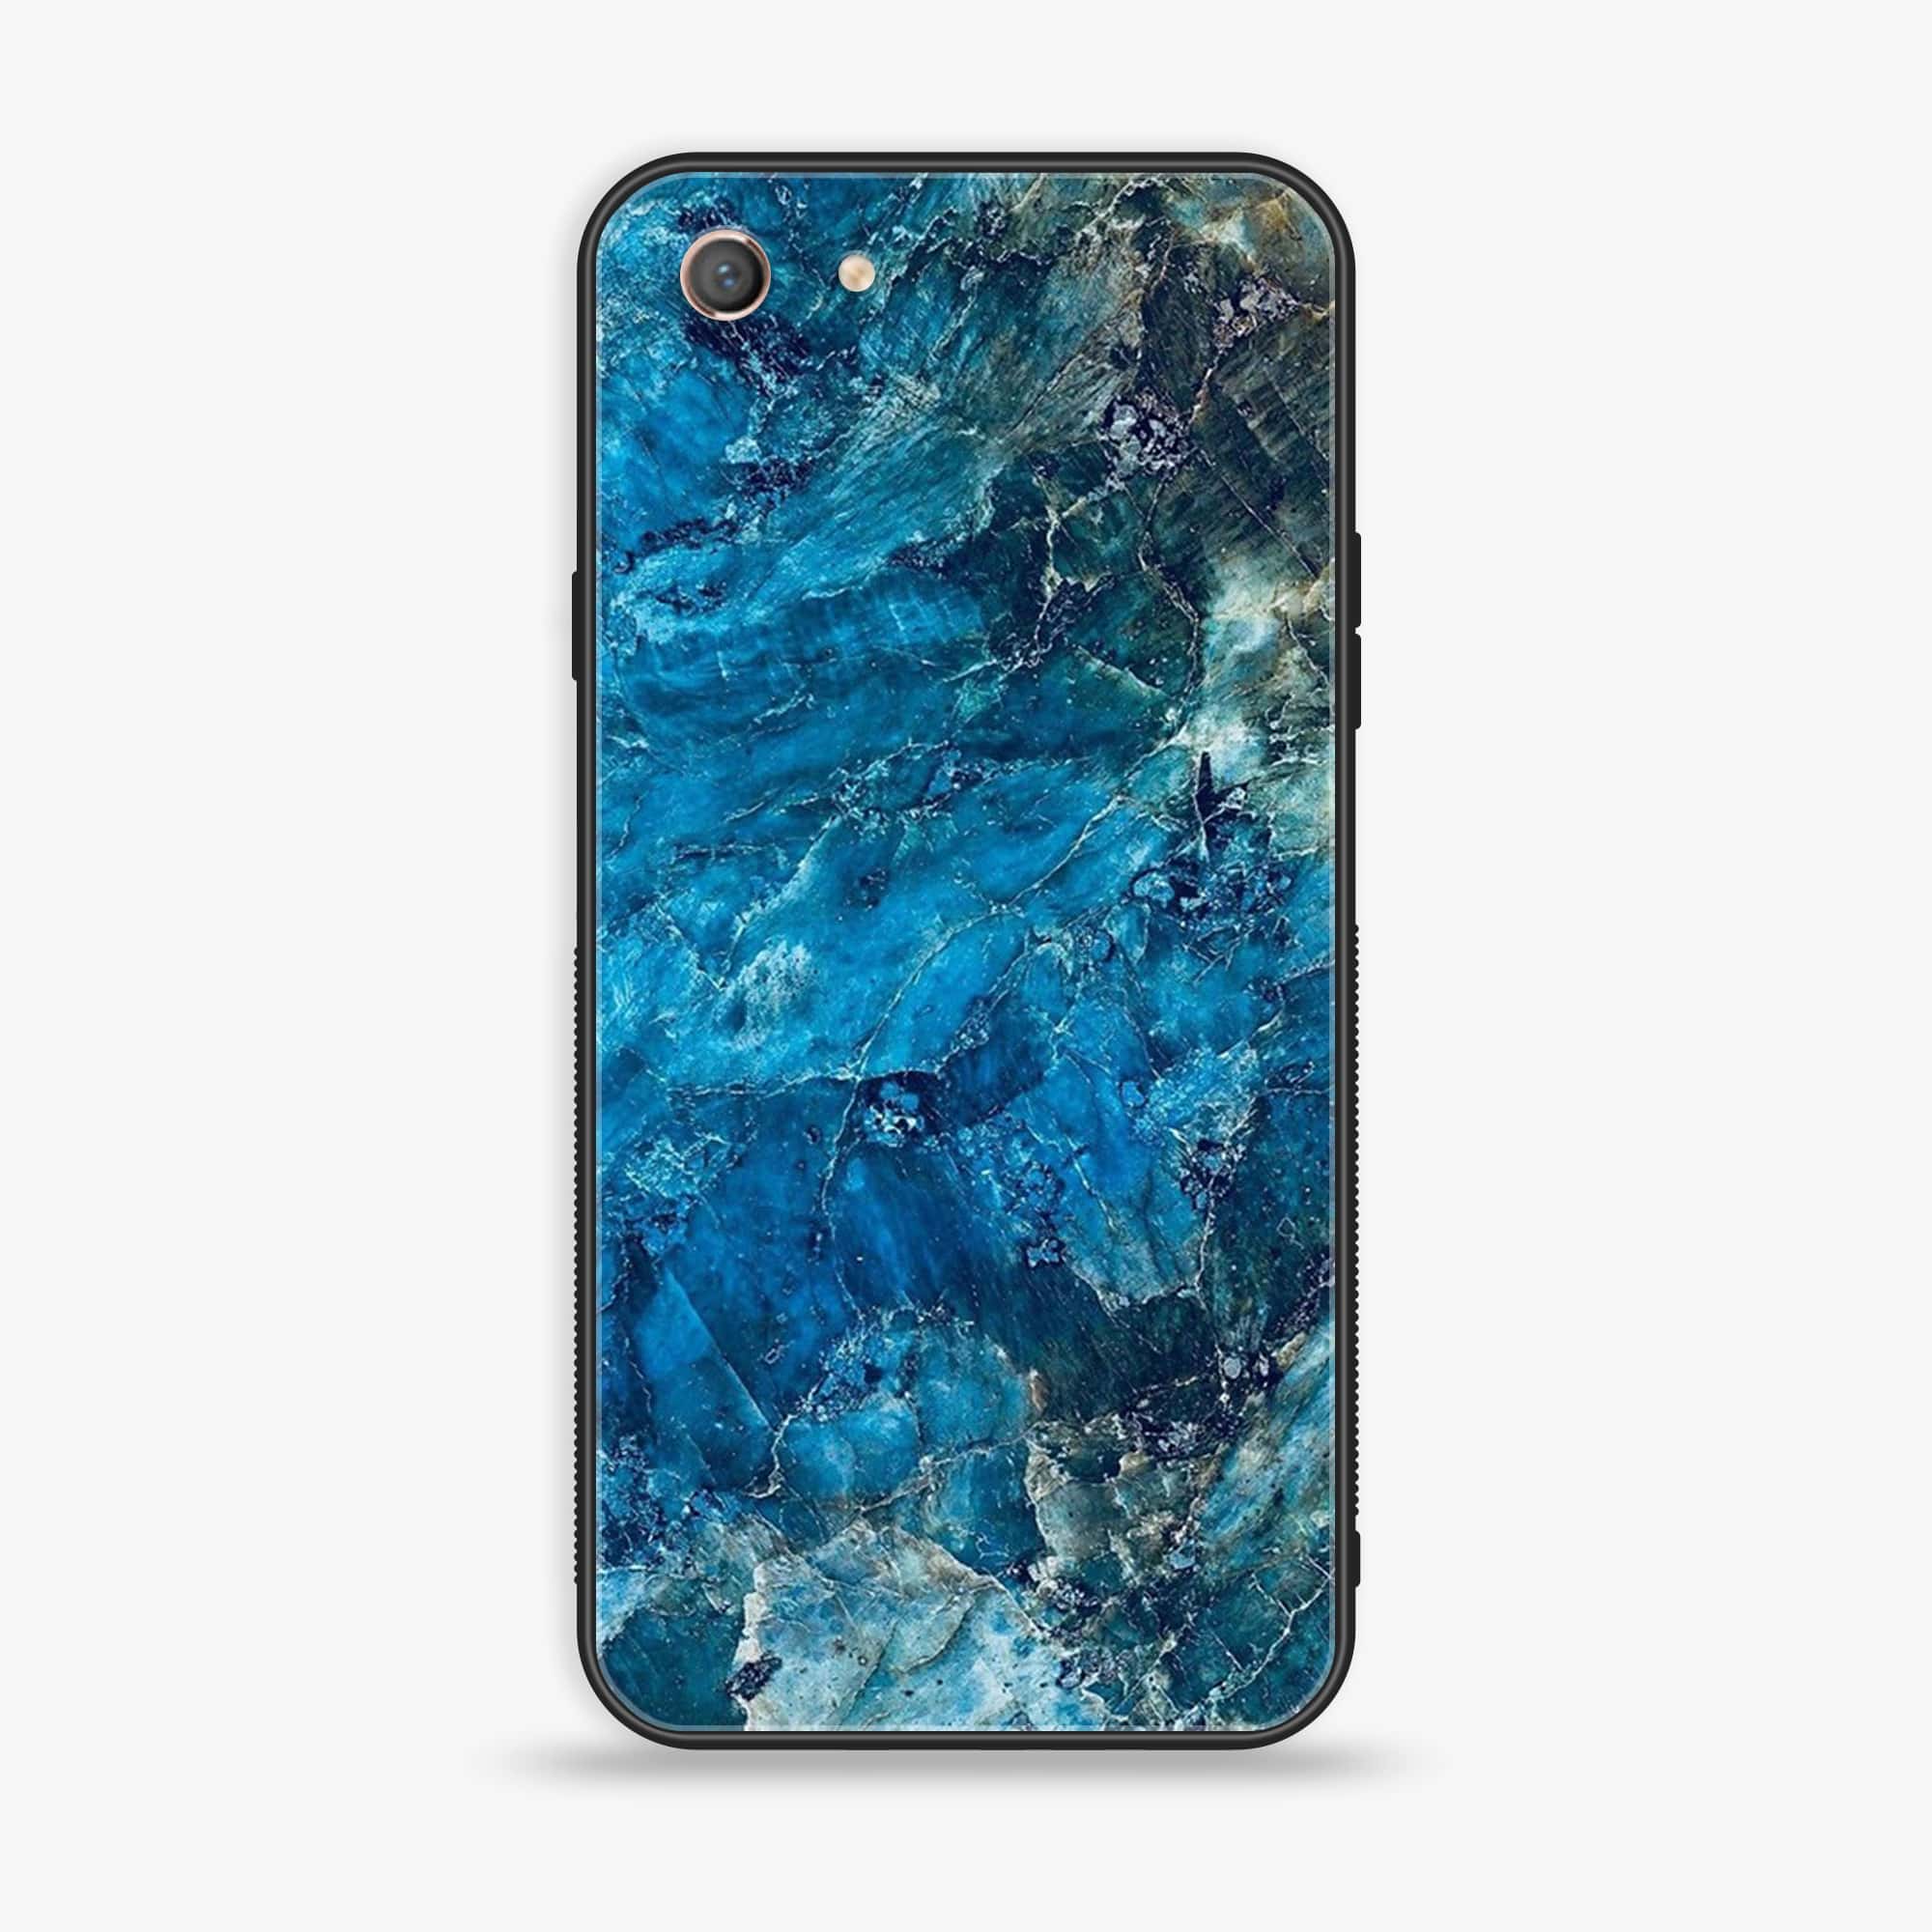 Oppo A71 (2018) - Blue Marble Series - Premium Printed Glass soft Bumper shock Proof Case